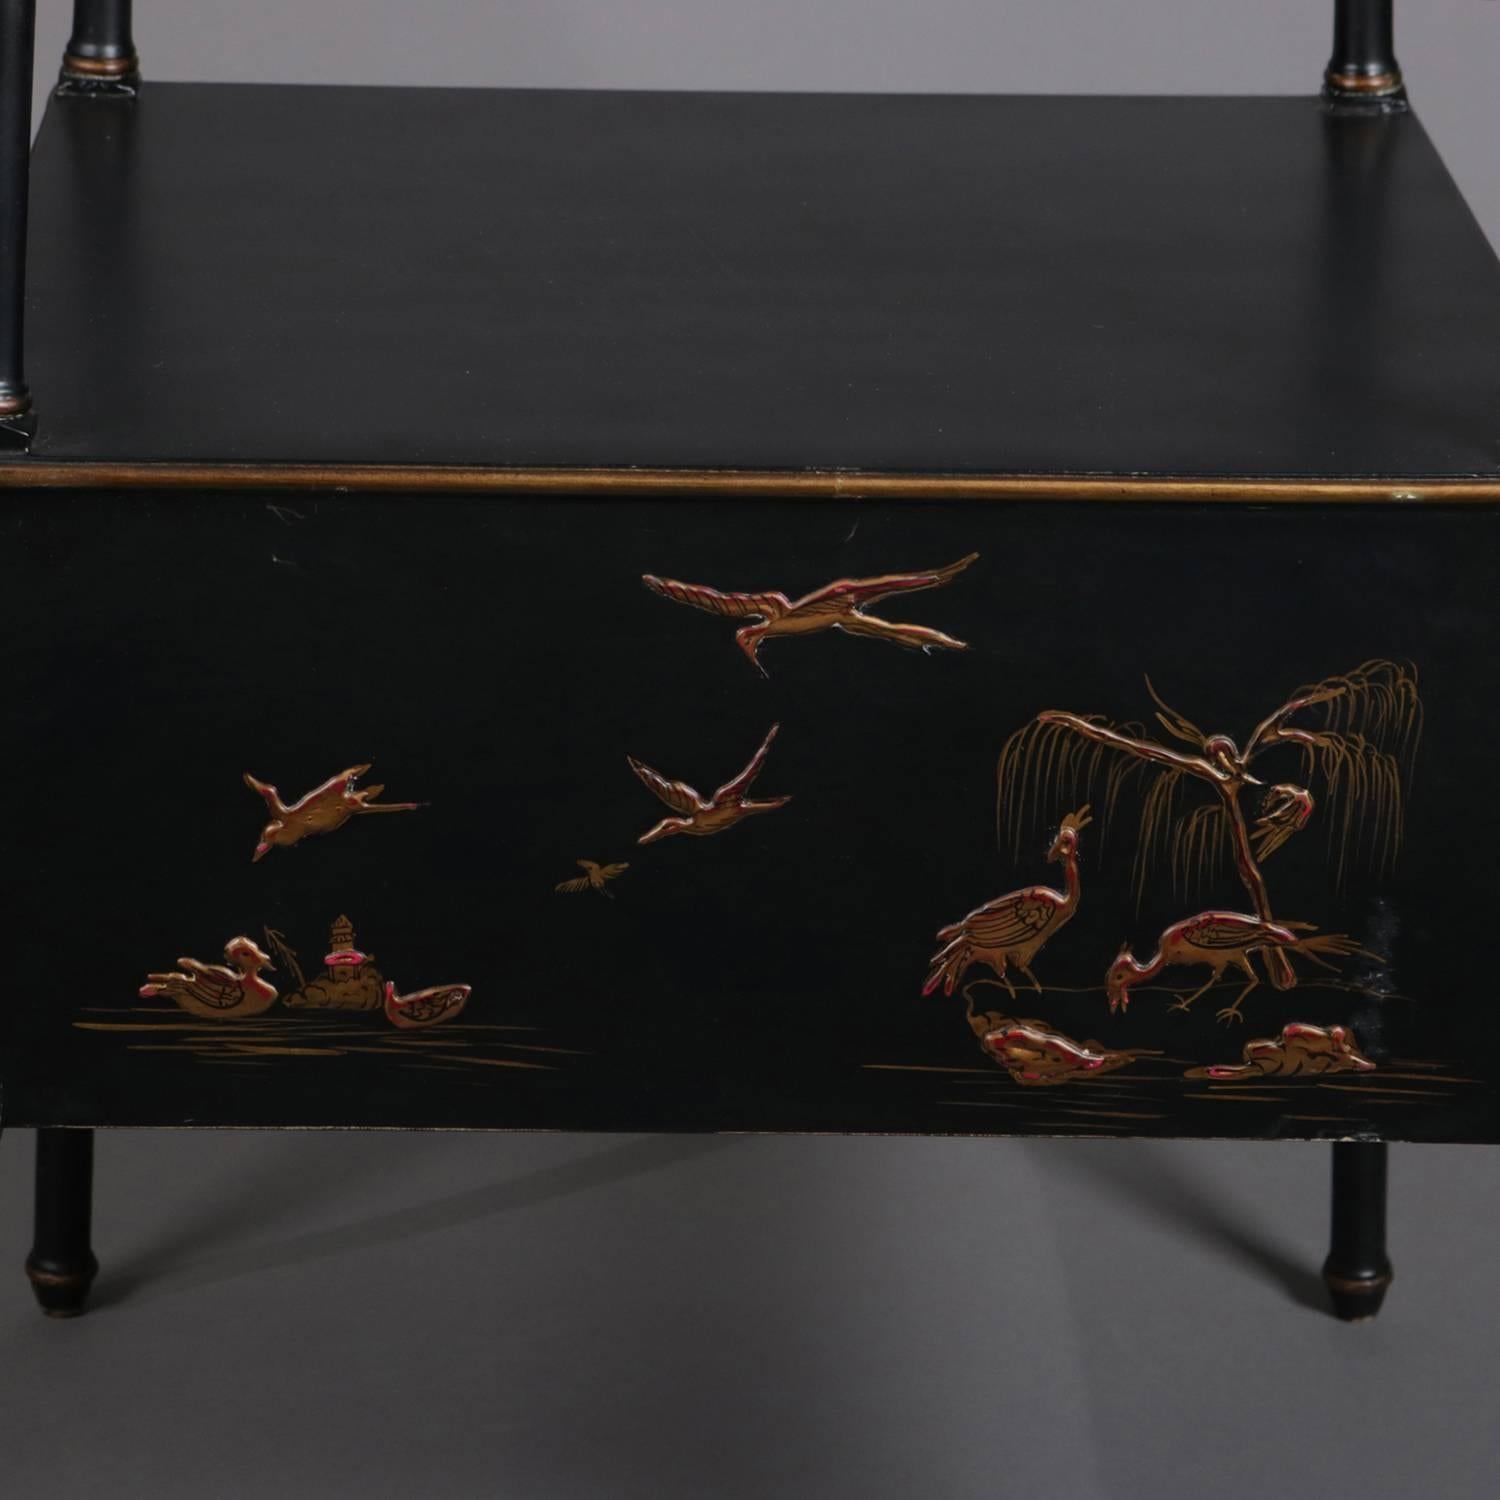 Vintage chinoiserie four-tier display stand features graduated displays, ebonized finish with gilt decorated apron depicting villager and marsh scene with birds, gilt checkering and banding throughout, 20th century

Measures: 69